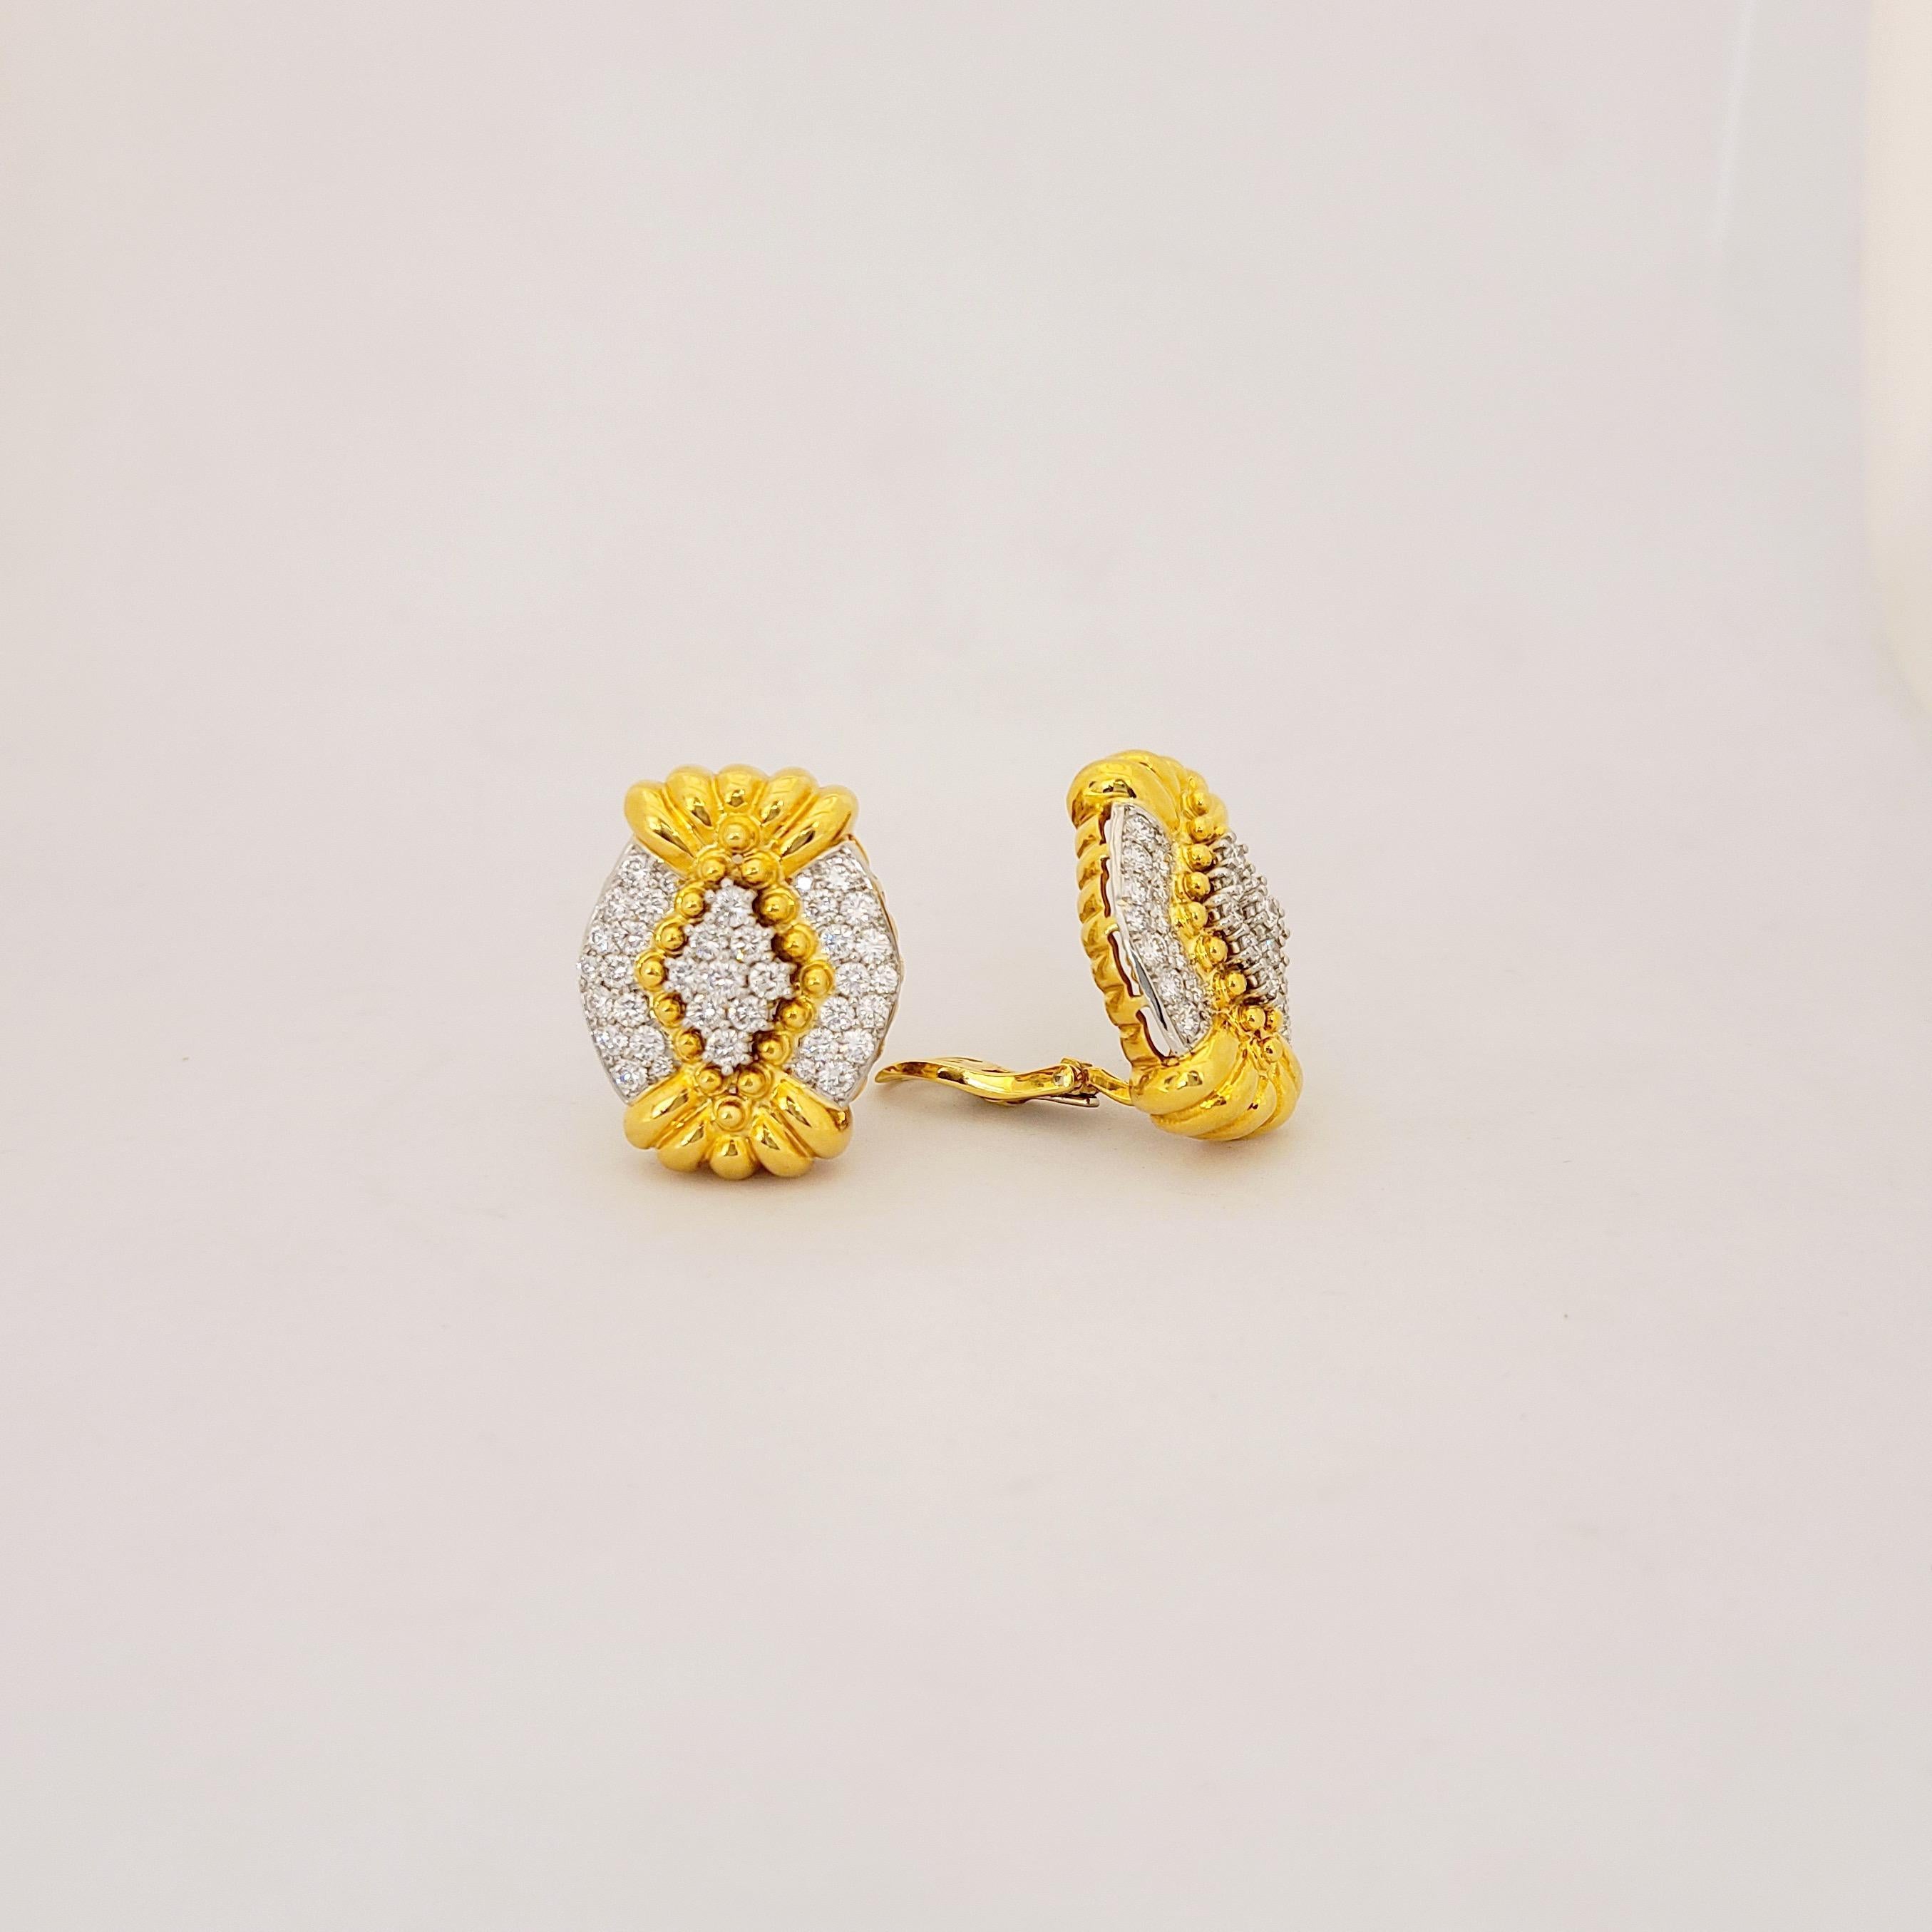 Beautiful 18 karat yellow gold and platinum, Diamond designed by Tilson Gem Designs for their Chaavae collection. These beautiful Earrings are shaped in a modified oval and contain 3.50Ct. of Round Brilliants set in Platinum - to enhance vibrancy of